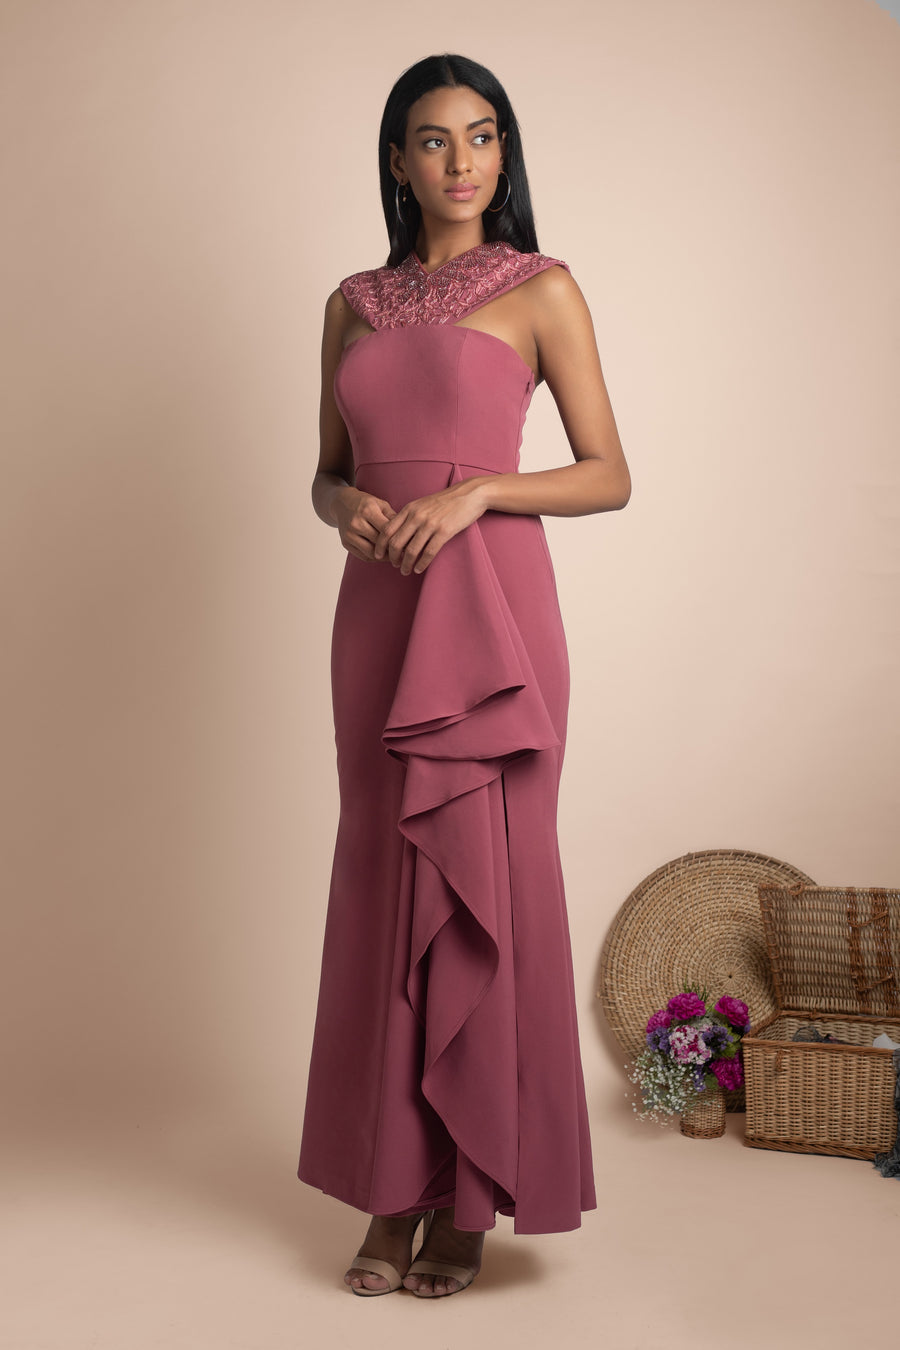 Mehak Murpana | Halter Neck Gown | Stylish formal and party wear.